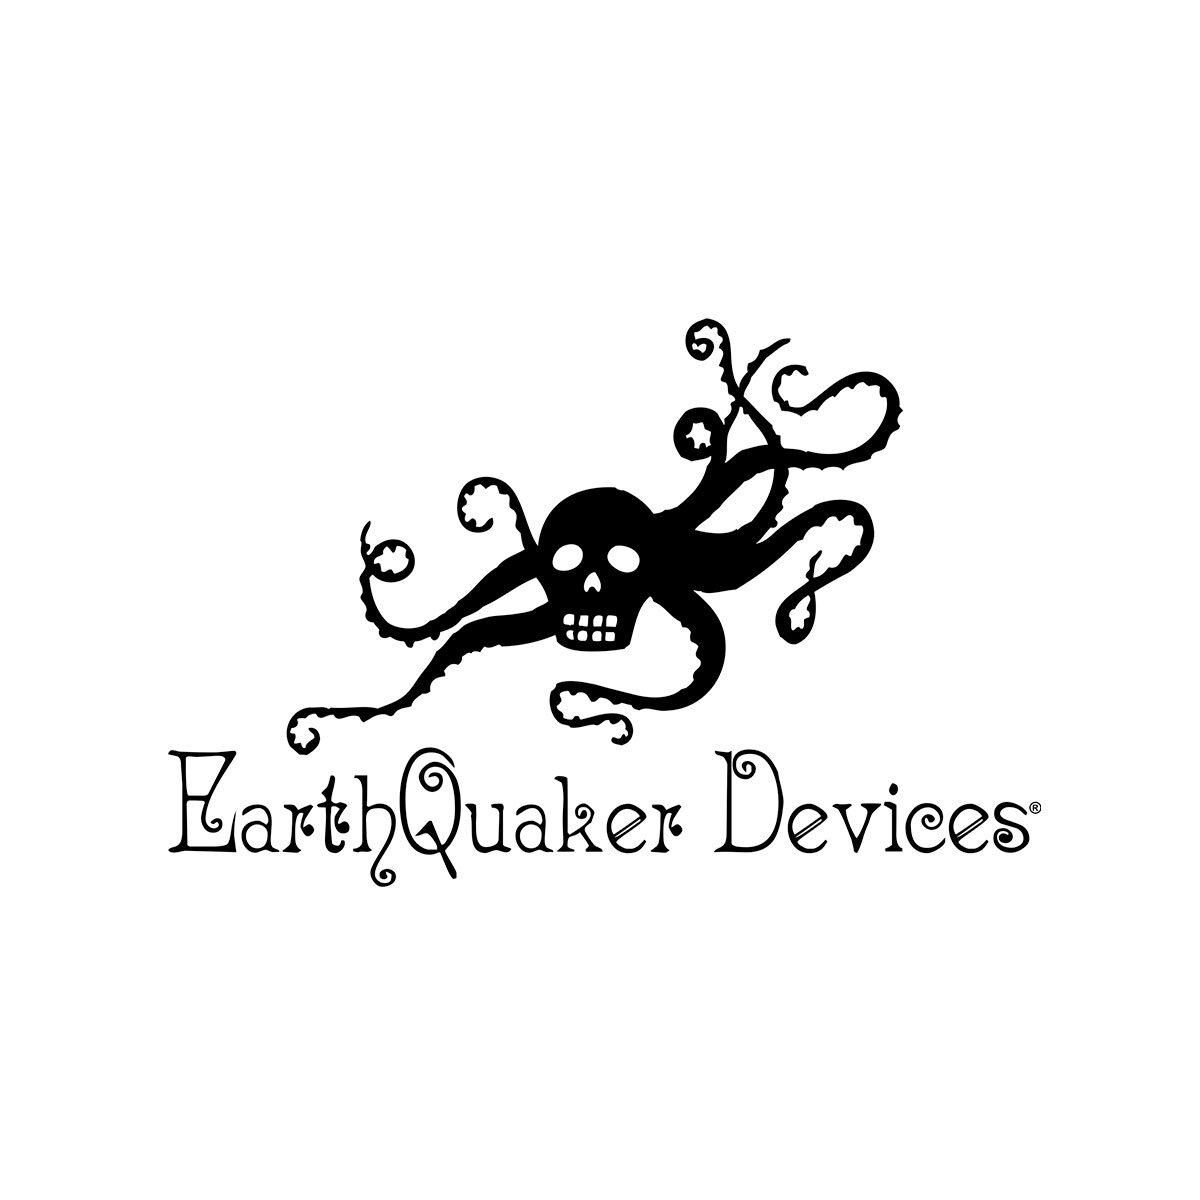 (c) Earthquakerdevices.com